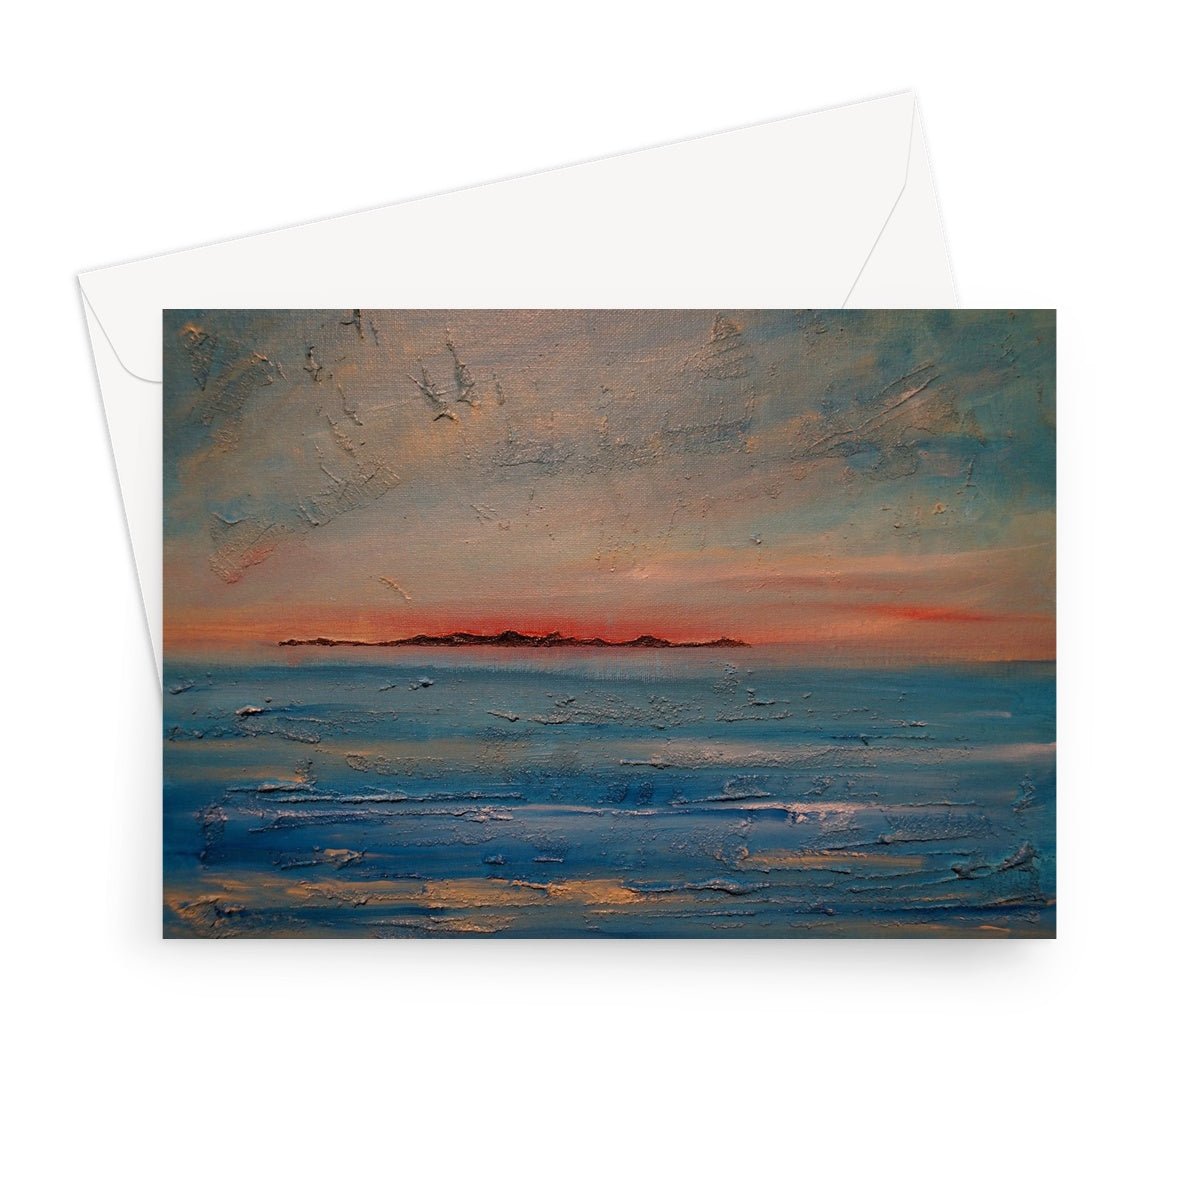 Gigha Sunset Art Gifts Greeting Card-Greetings Cards-Hebridean Islands Art Gallery-7"x5"-10 Cards-Paintings, Prints, Homeware, Art Gifts From Scotland By Scottish Artist Kevin Hunter